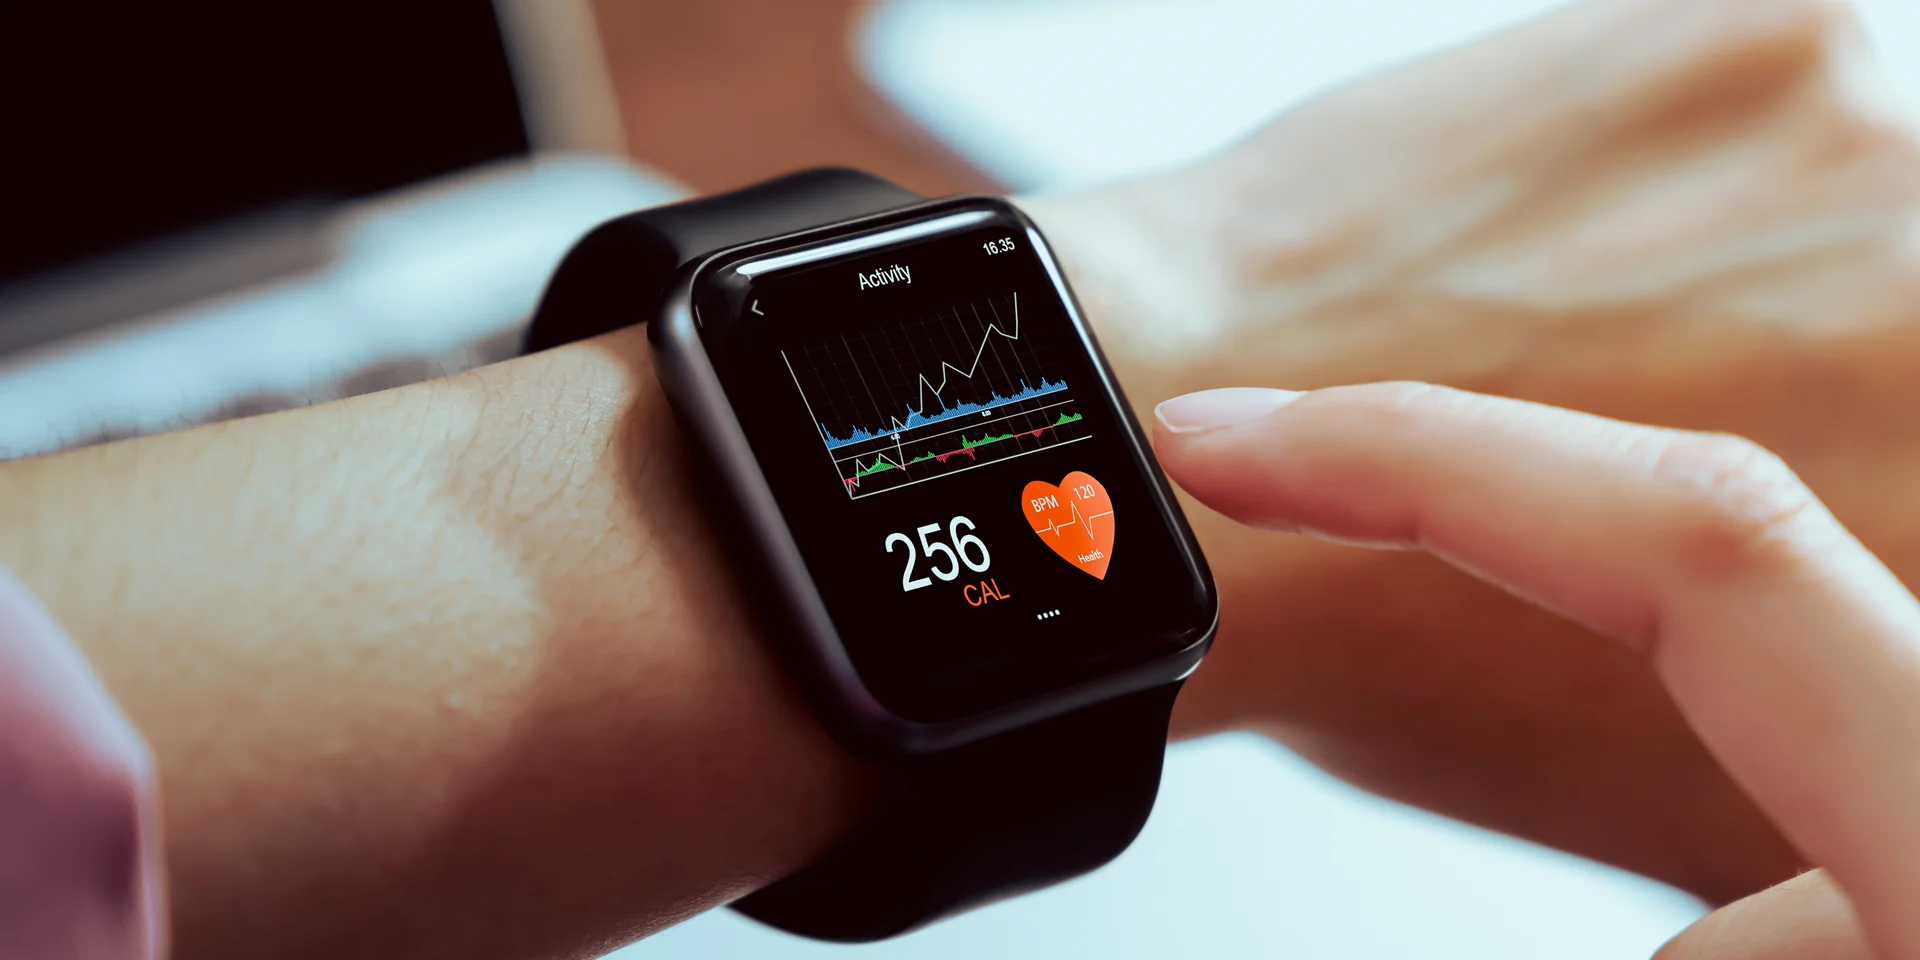 You can see your pulse and heart rate on a smartwatch